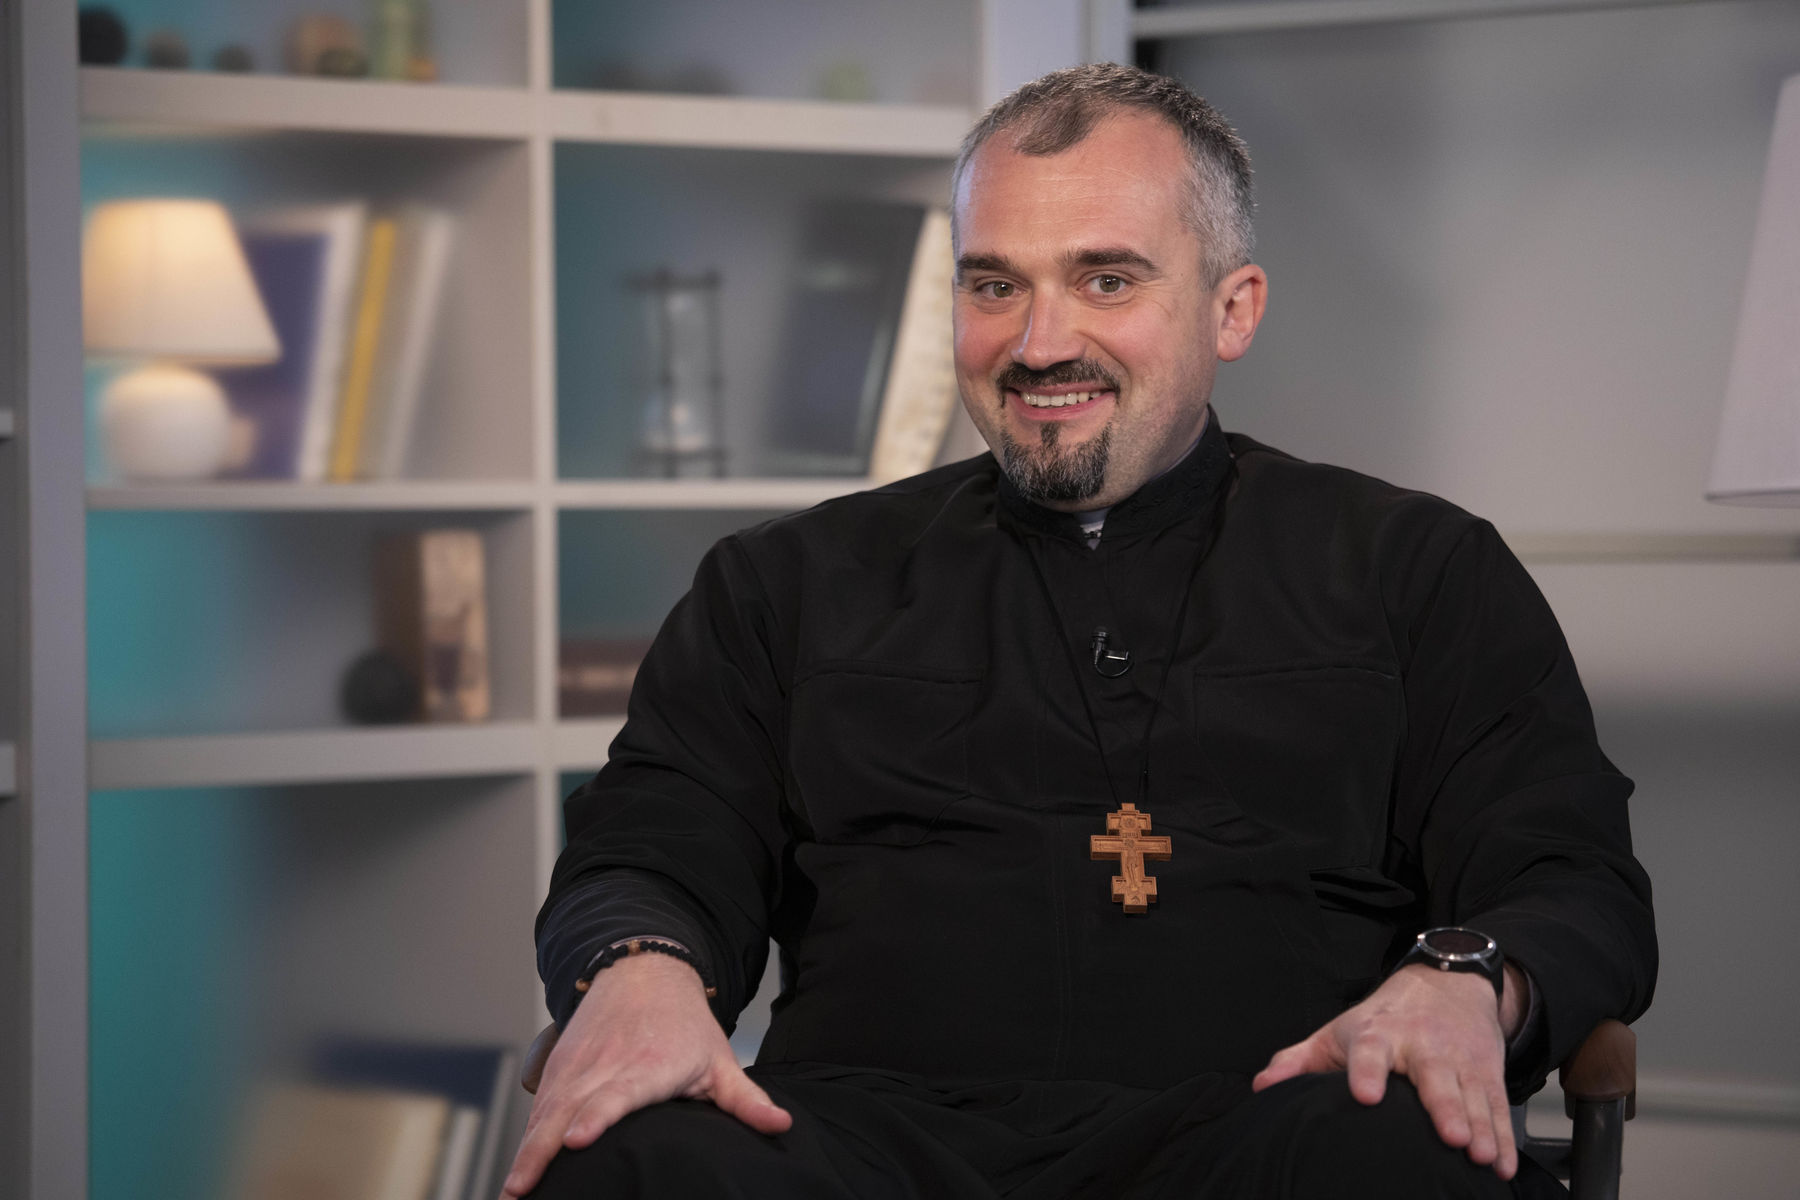 The Episcopal ordination of Fr. Andrii Khimyak will take place in the Patriarchal Cathedral of the UGCC